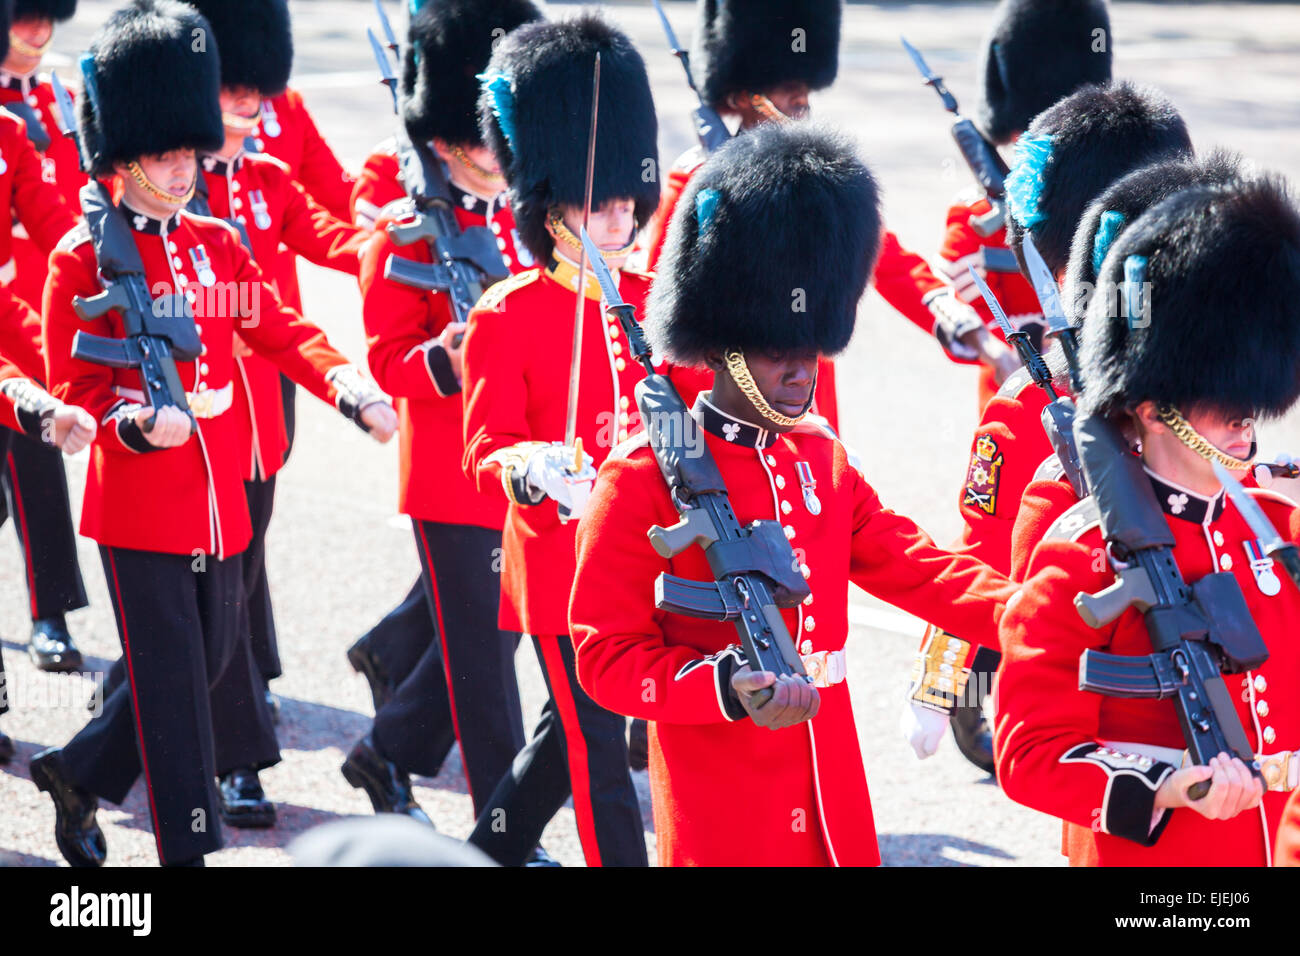 LONDON - APR 6: The colorful changing of the royal guard ceremony at Buckingham Palace on April 6, 2012 in London, which is one  Stock Photo